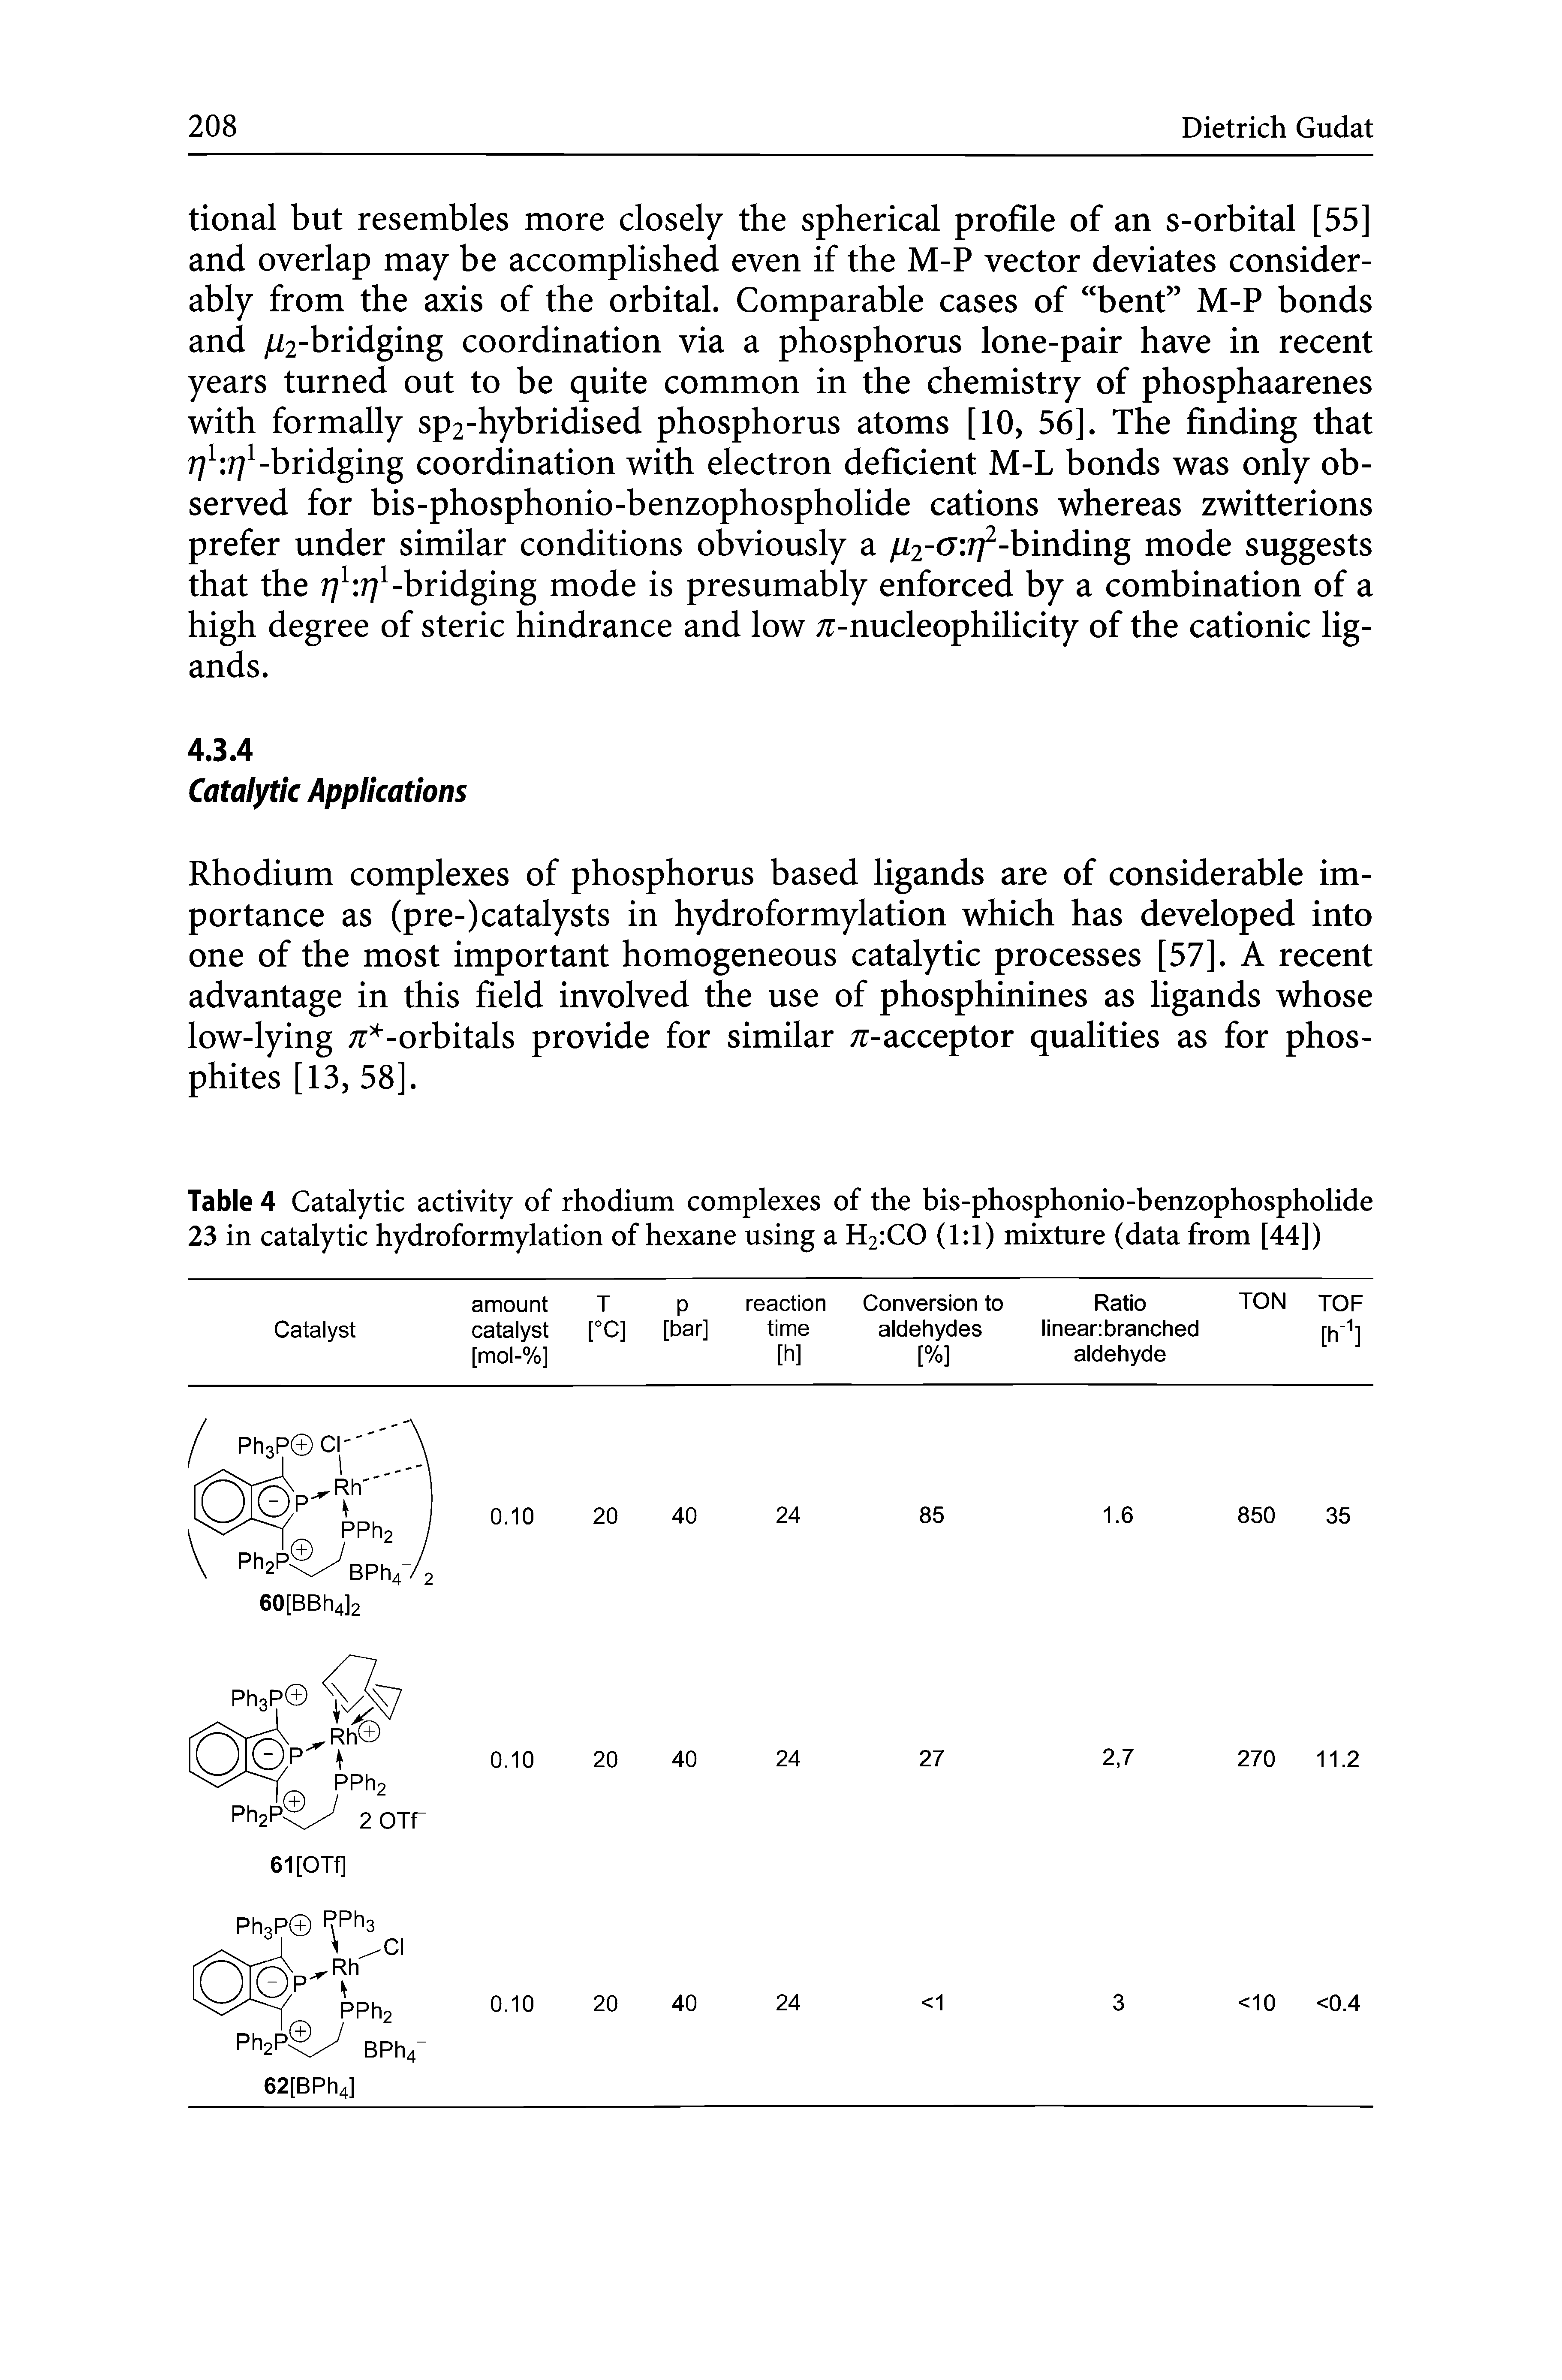 Table 4 Catalytic activity of rhodium complexes of the bis-phosphonio-benzophospholide 23 in catalytic hydroformylation of hexane using a H2iCO (1 1) mixture (data from [44])...